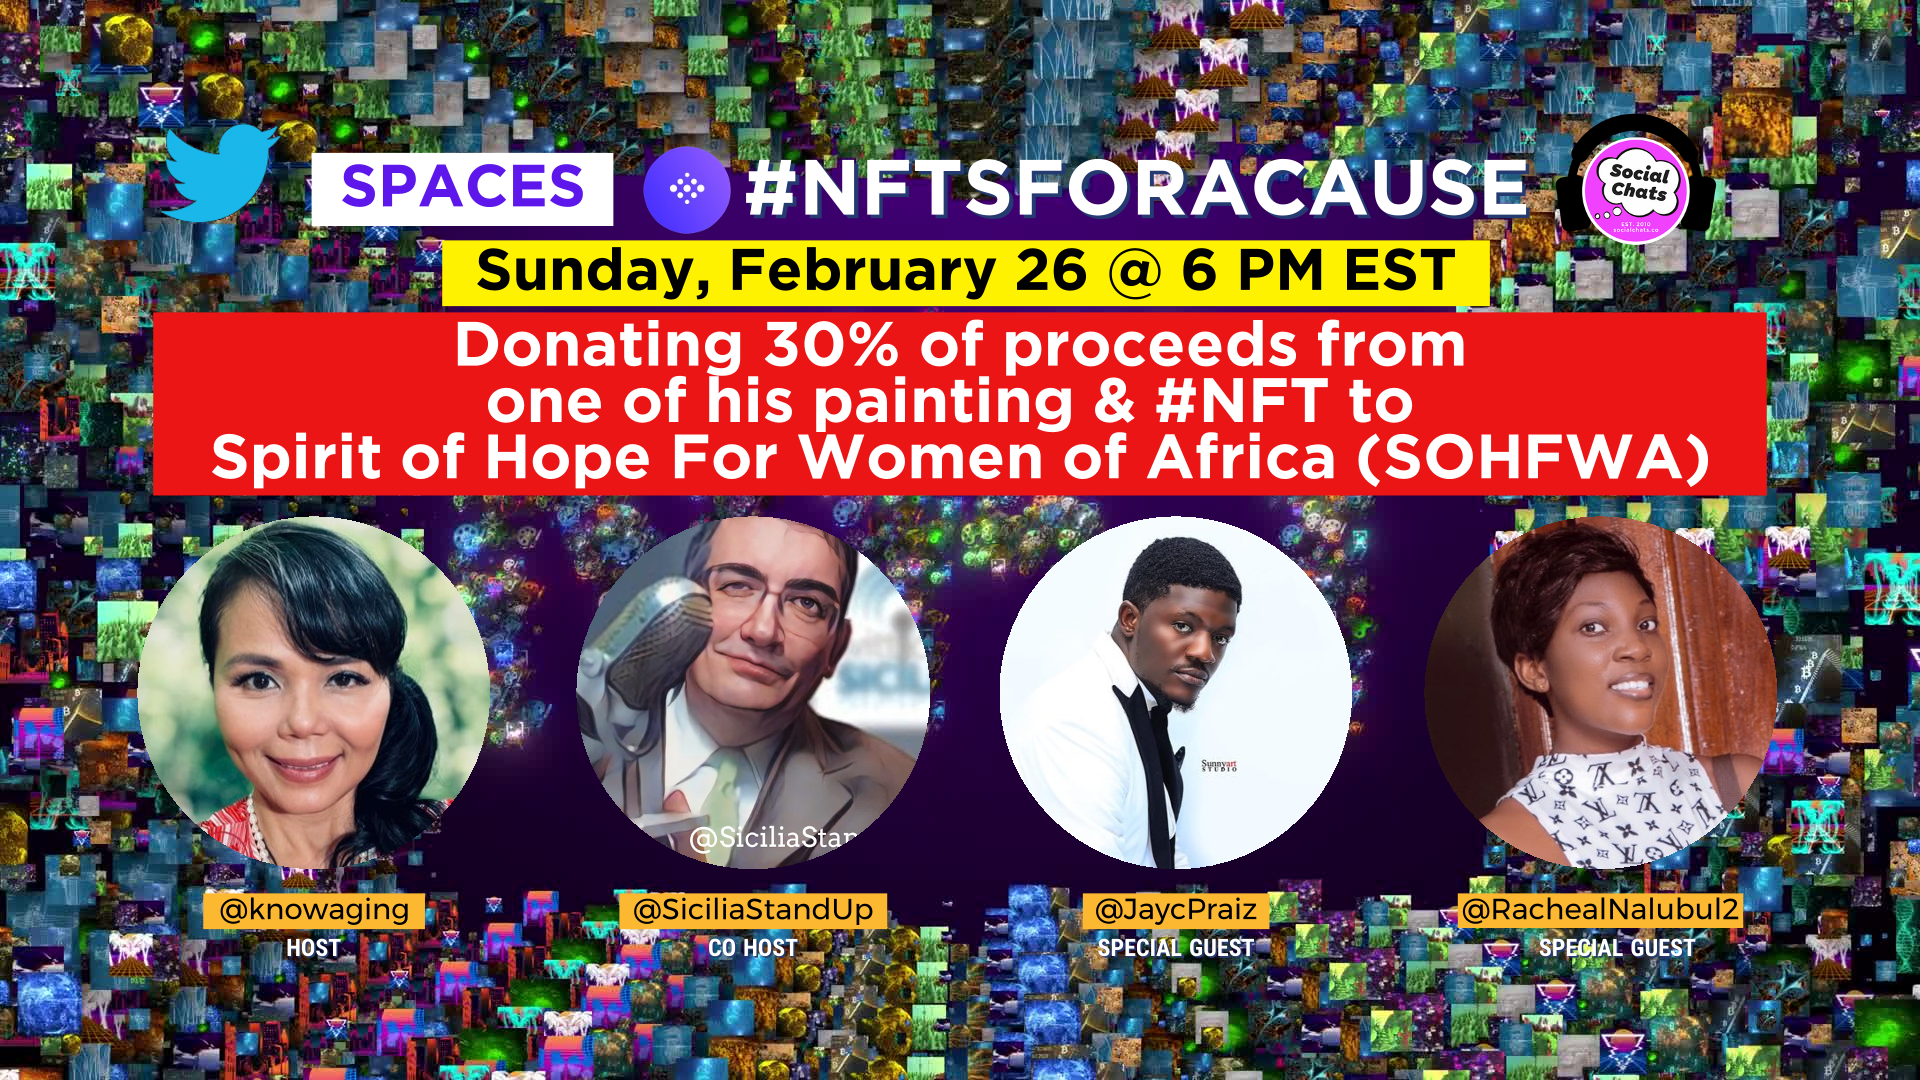 oin @SiciliaStandUp & @knowaging for #NFTsForACause via Twitter Spaces on Sunday, February 26 at 6 PM EST. Chat w/ @JaycPraiz about donating 30% of proceeds from one of his painting & #NFT to Spirit of Hope For Women of Africa (#SOHFWA) founded by @RachealNalubul2. Tap link below to join in on the chat via Twitter App. ⬇️ https://twitter.com/i/spaces/1yNxaNPv... About Spirit of Hope for Women - Africa (SOHFWA) Spirit of Hope for Women - Africa (SOHFWA) is a registered Non-Government Organization that realizes the significance of a positive influence on children in the development of society. It was established in 2018 as a community-based project that was extending its services in the rural Wakiso. The project is operating with a vision of uplifting and supporting the girl child majorly during the menstruation periods, educating the young generation and making sure children acquire skills for life development and survival.